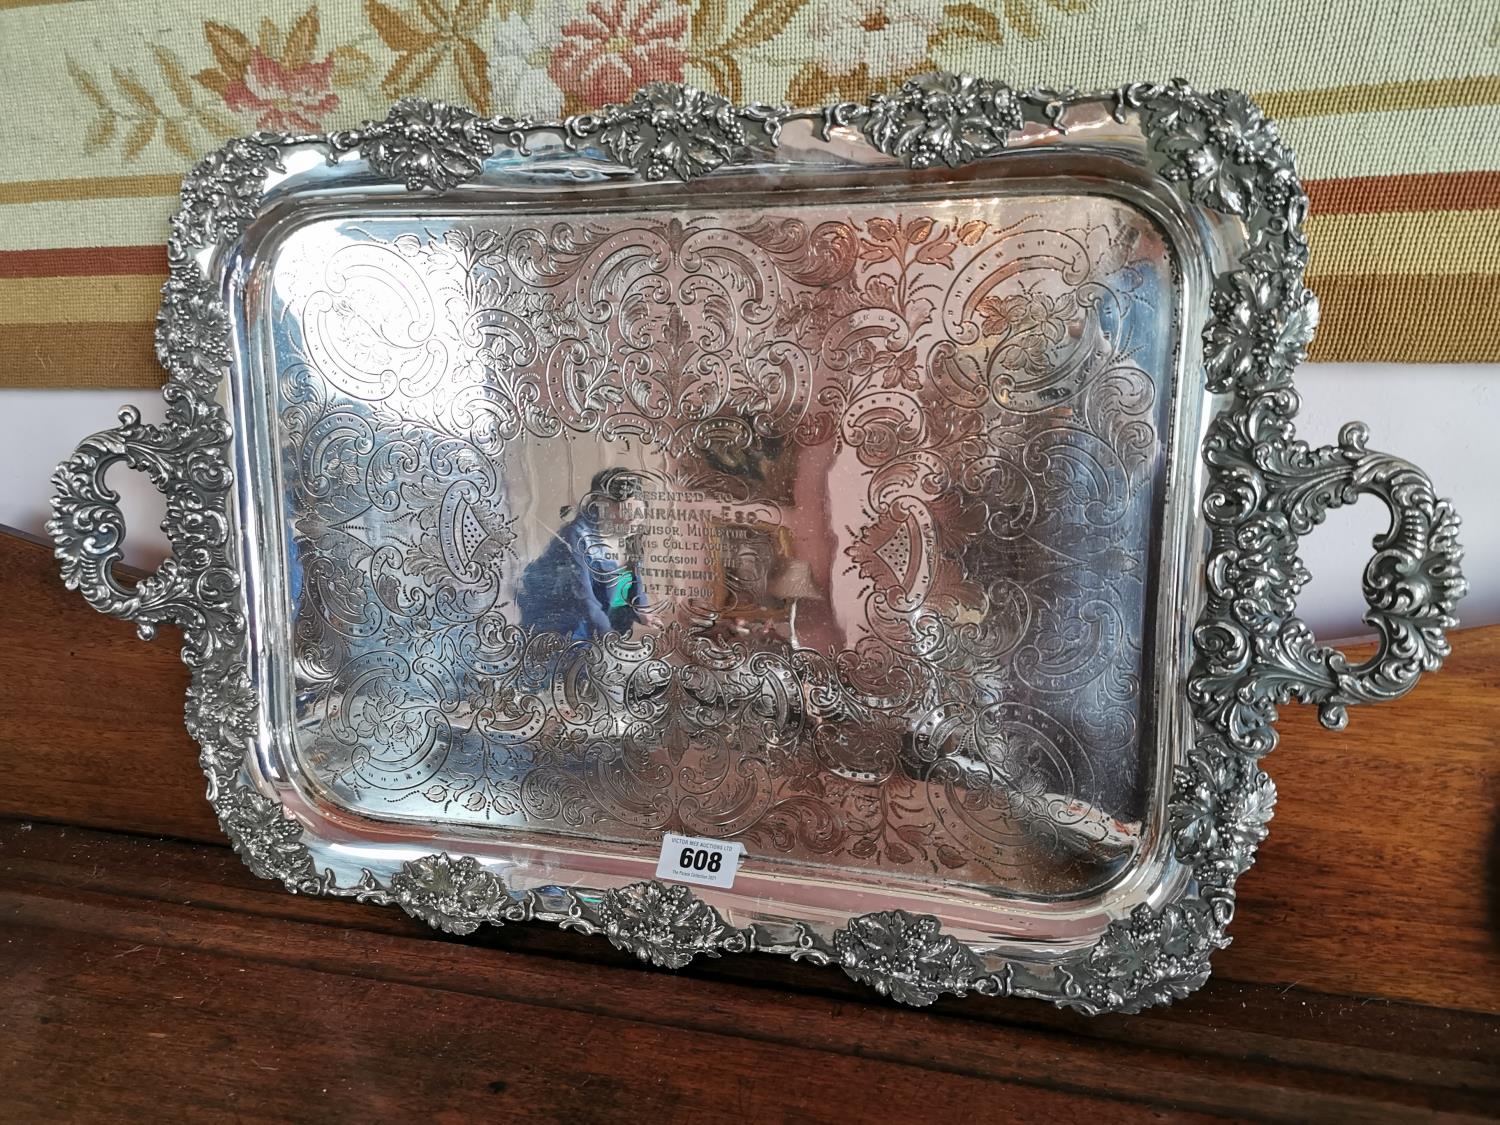 Early 20th C. silverplate serving tray.